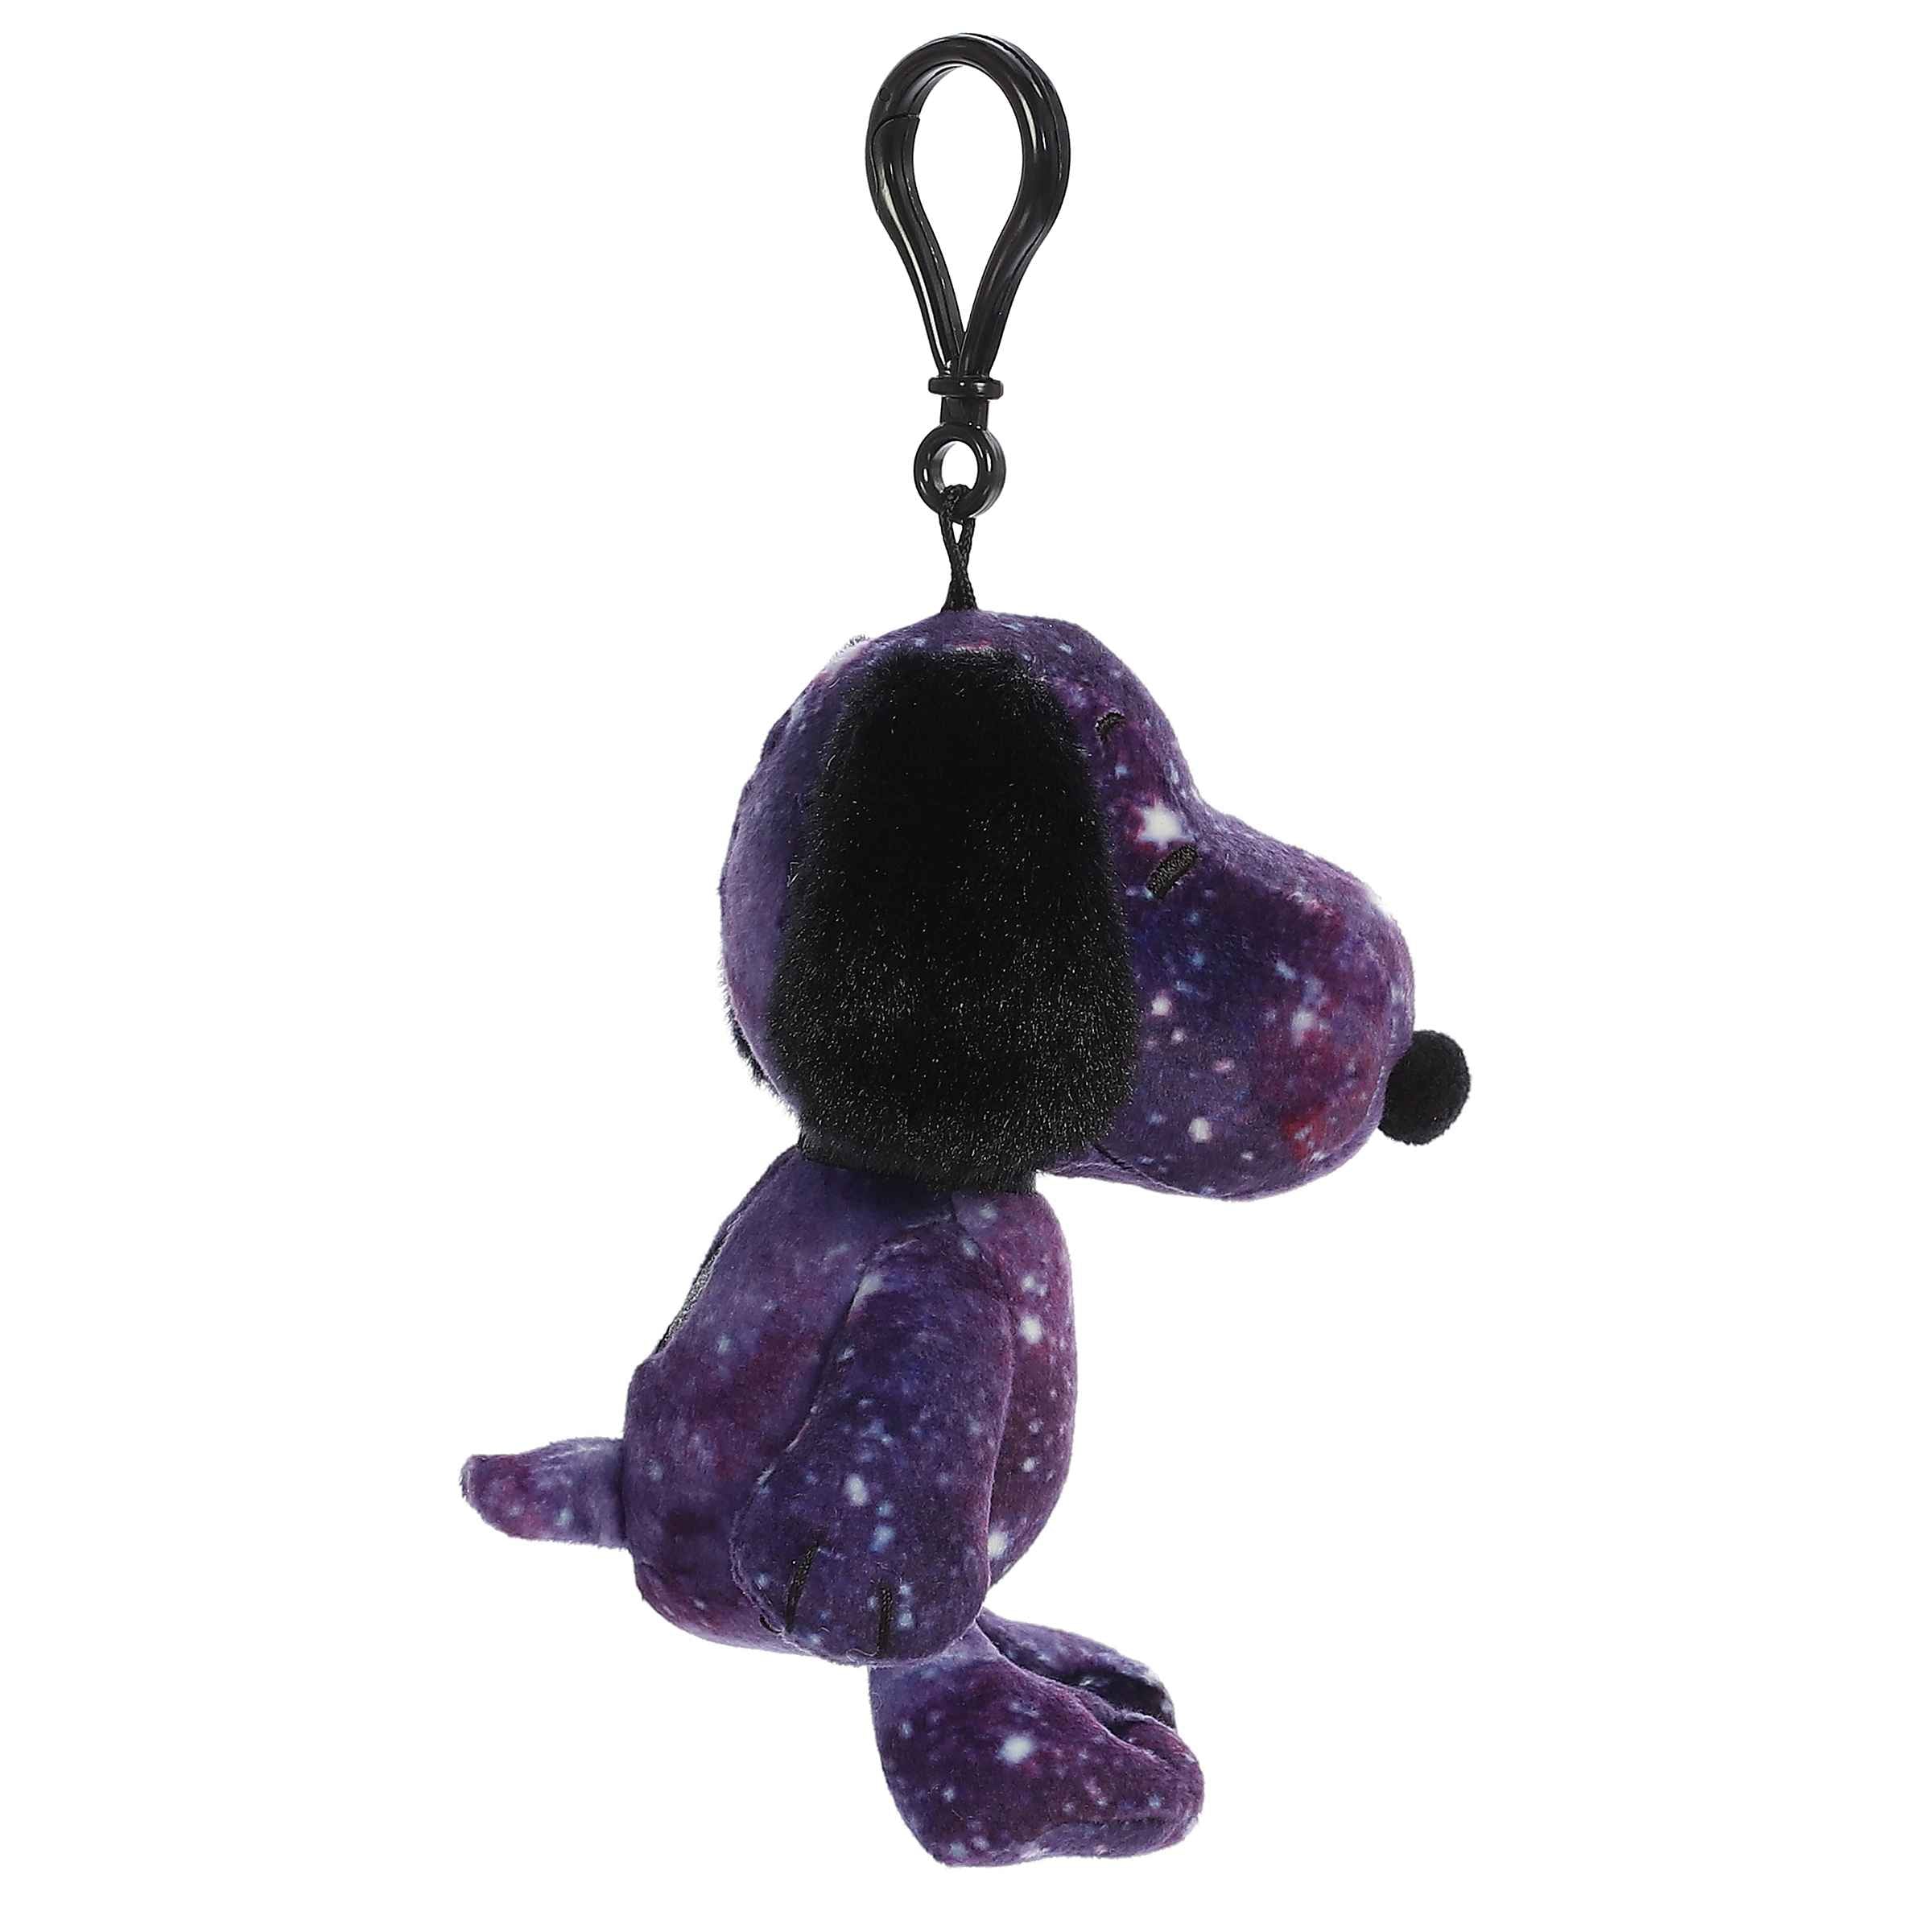 Aurora® - Peanuts® - 5" Spaced Out Snoopy Keychain